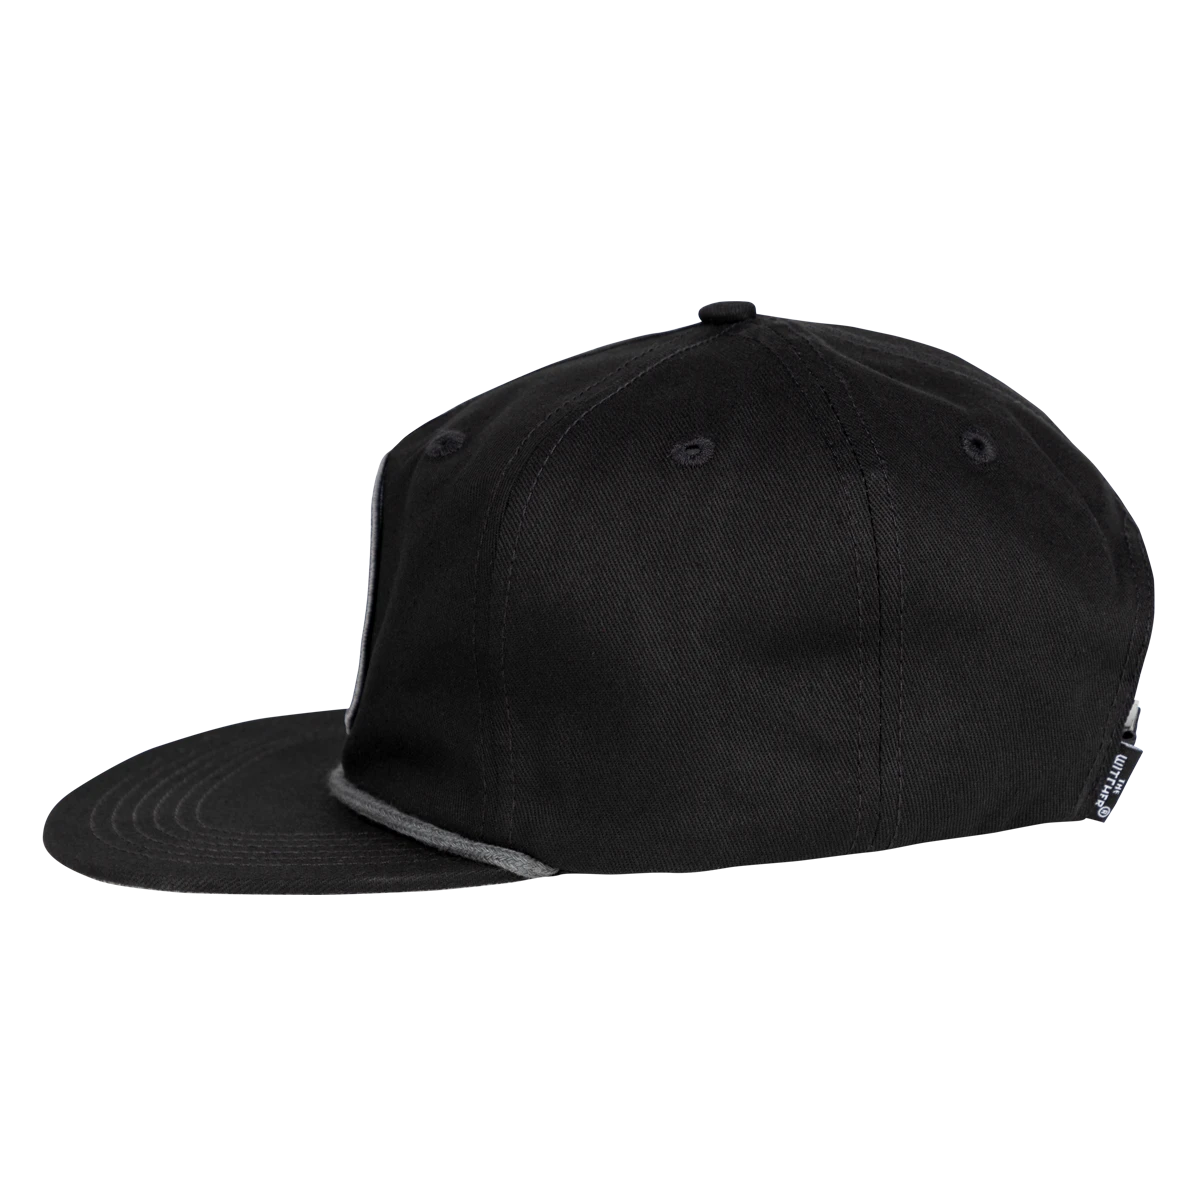 The Witcher Flatbill Cap "Patch" Black Image 3